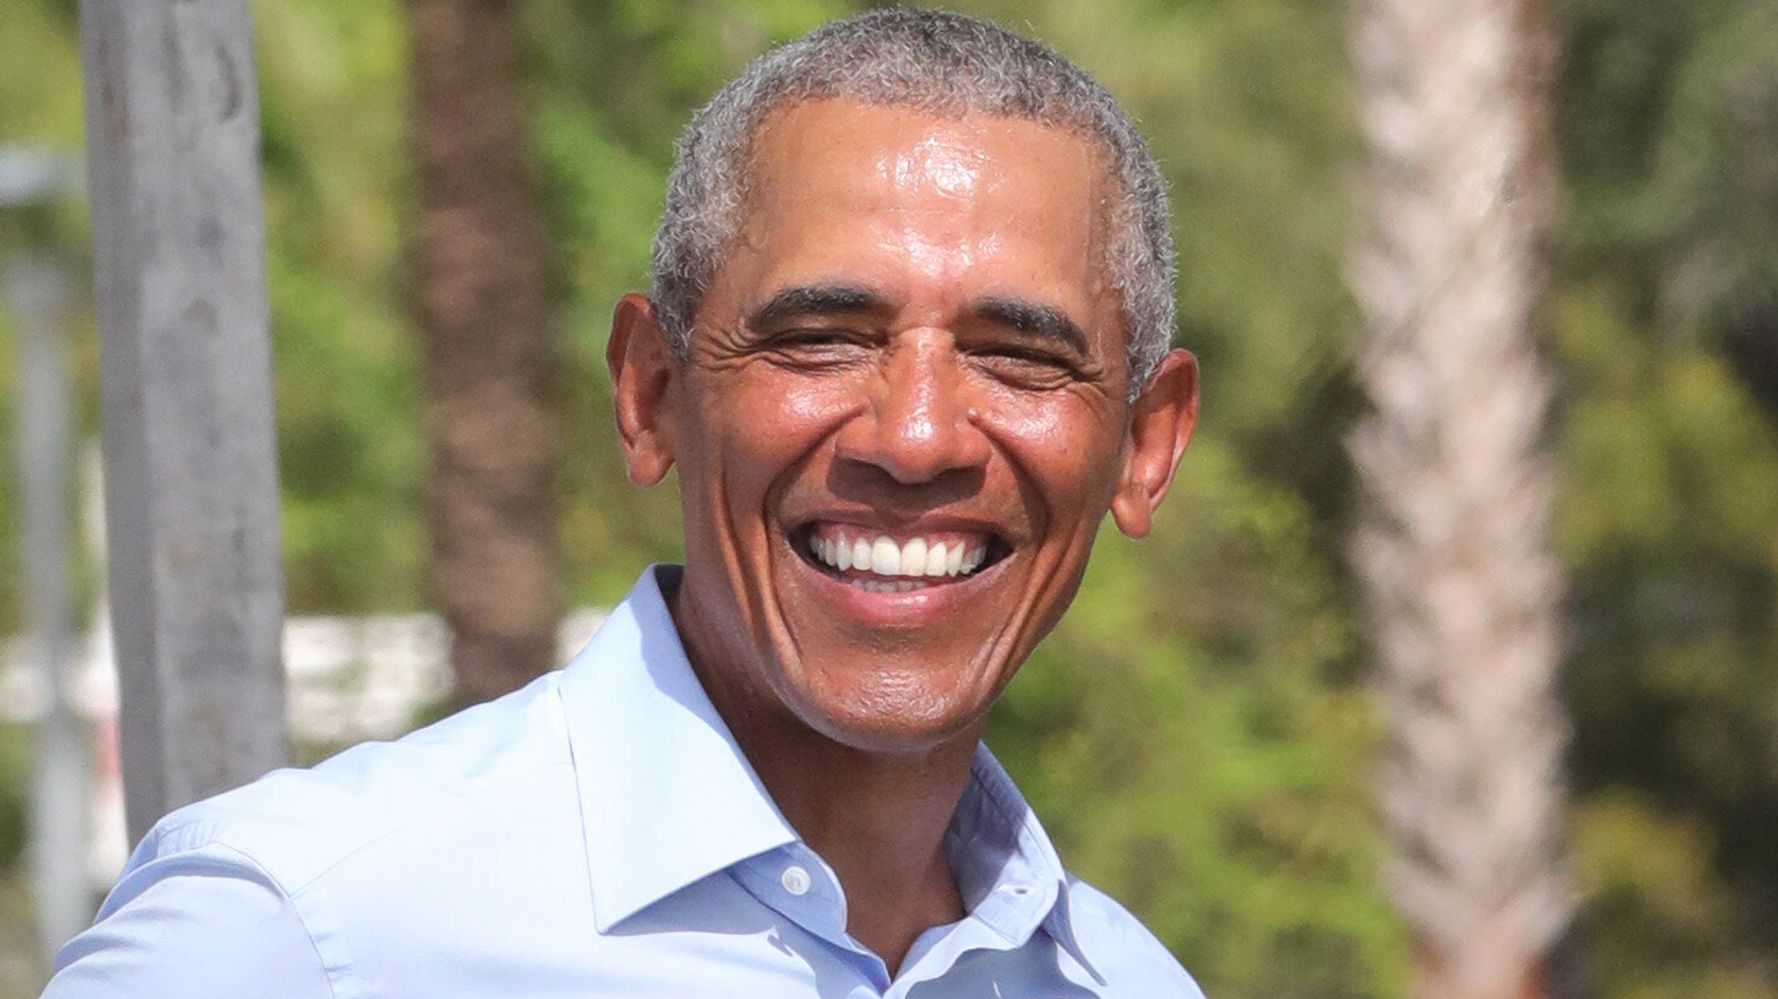 Barack Obama Is Throwing A Birthday Bash For His 60th Amid Spread Of Delta Variant